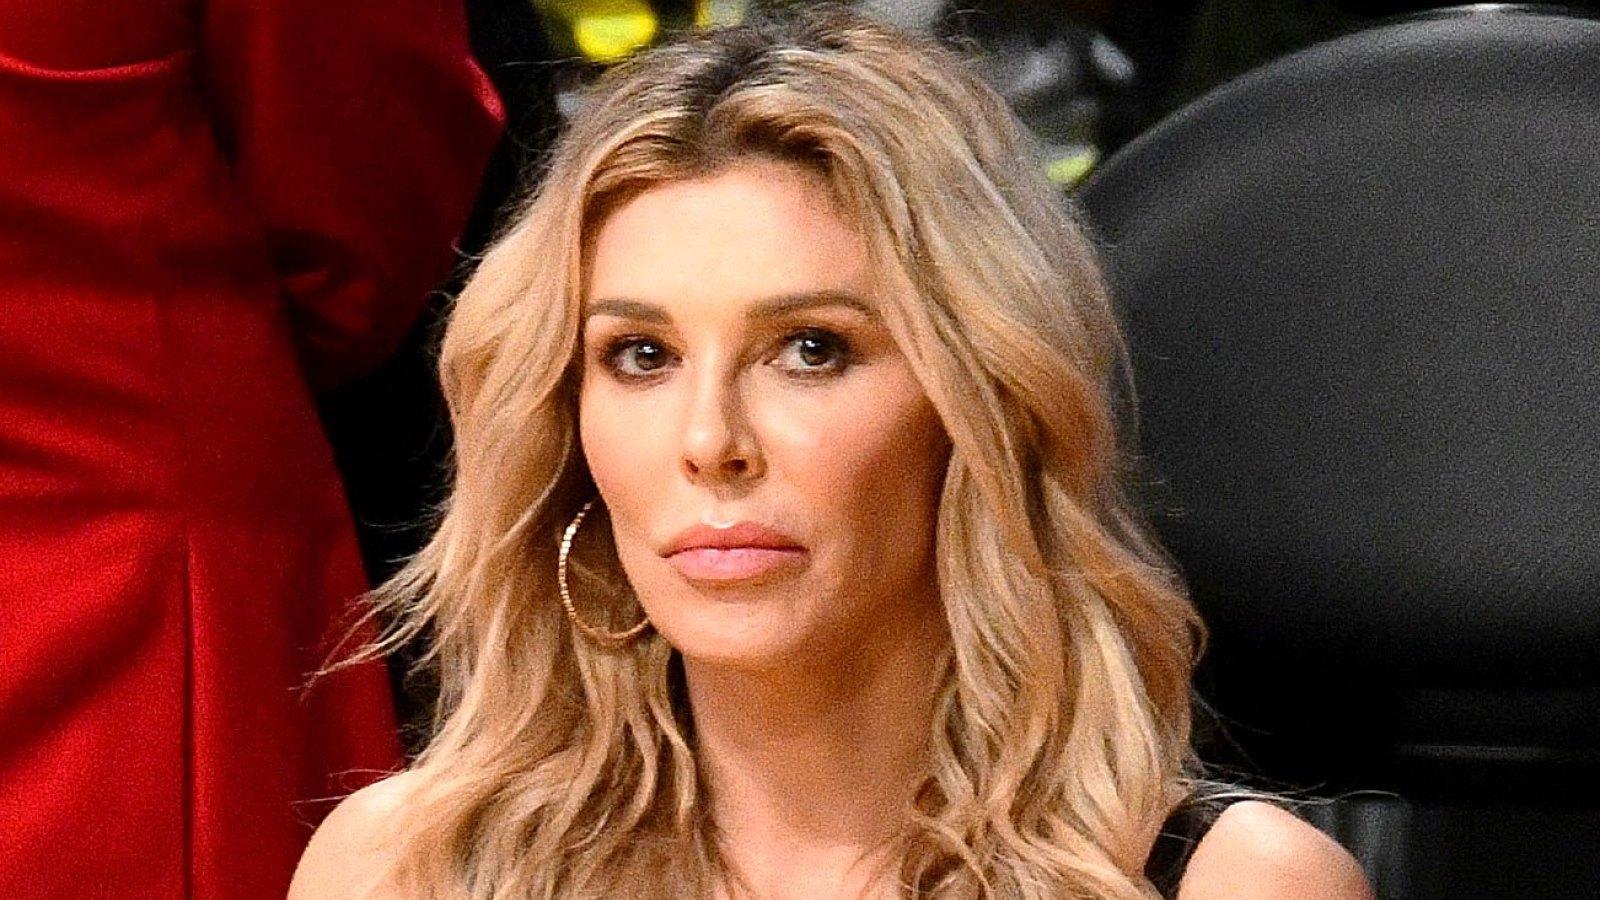 Brandi Glanville Cries After Getting 'Wasted' in Hollywood